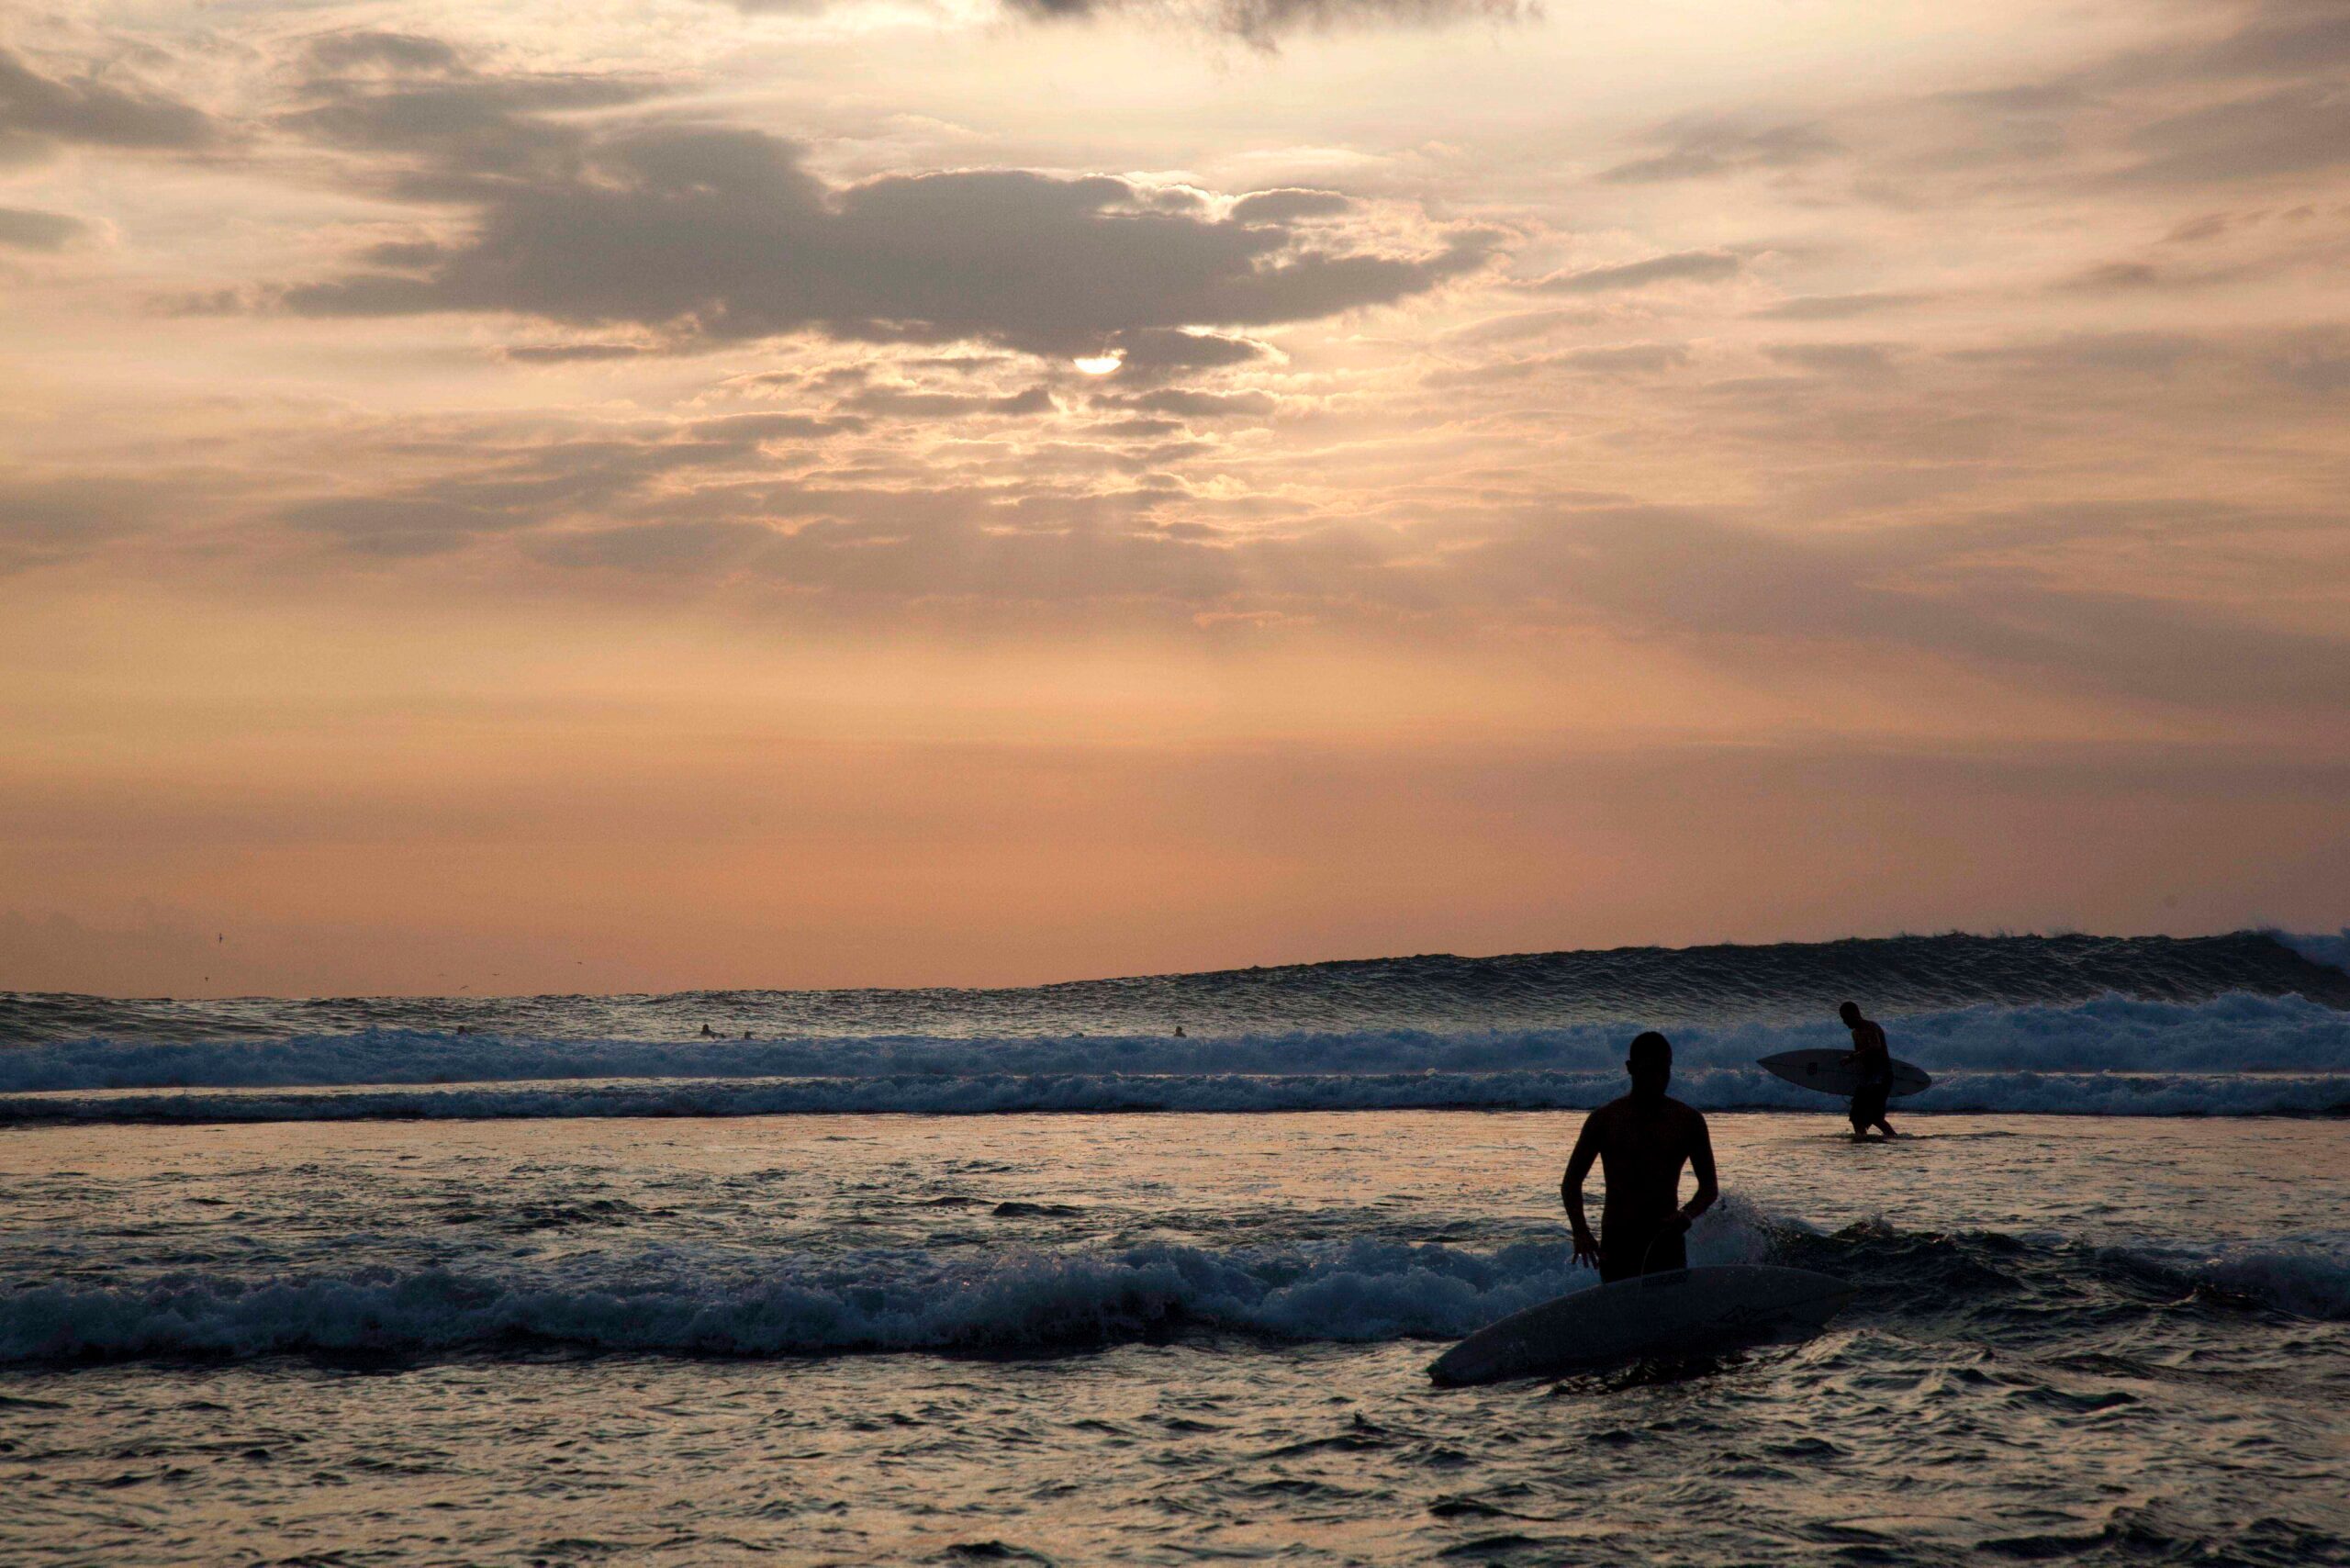 American surfer attacked by shark in Bali